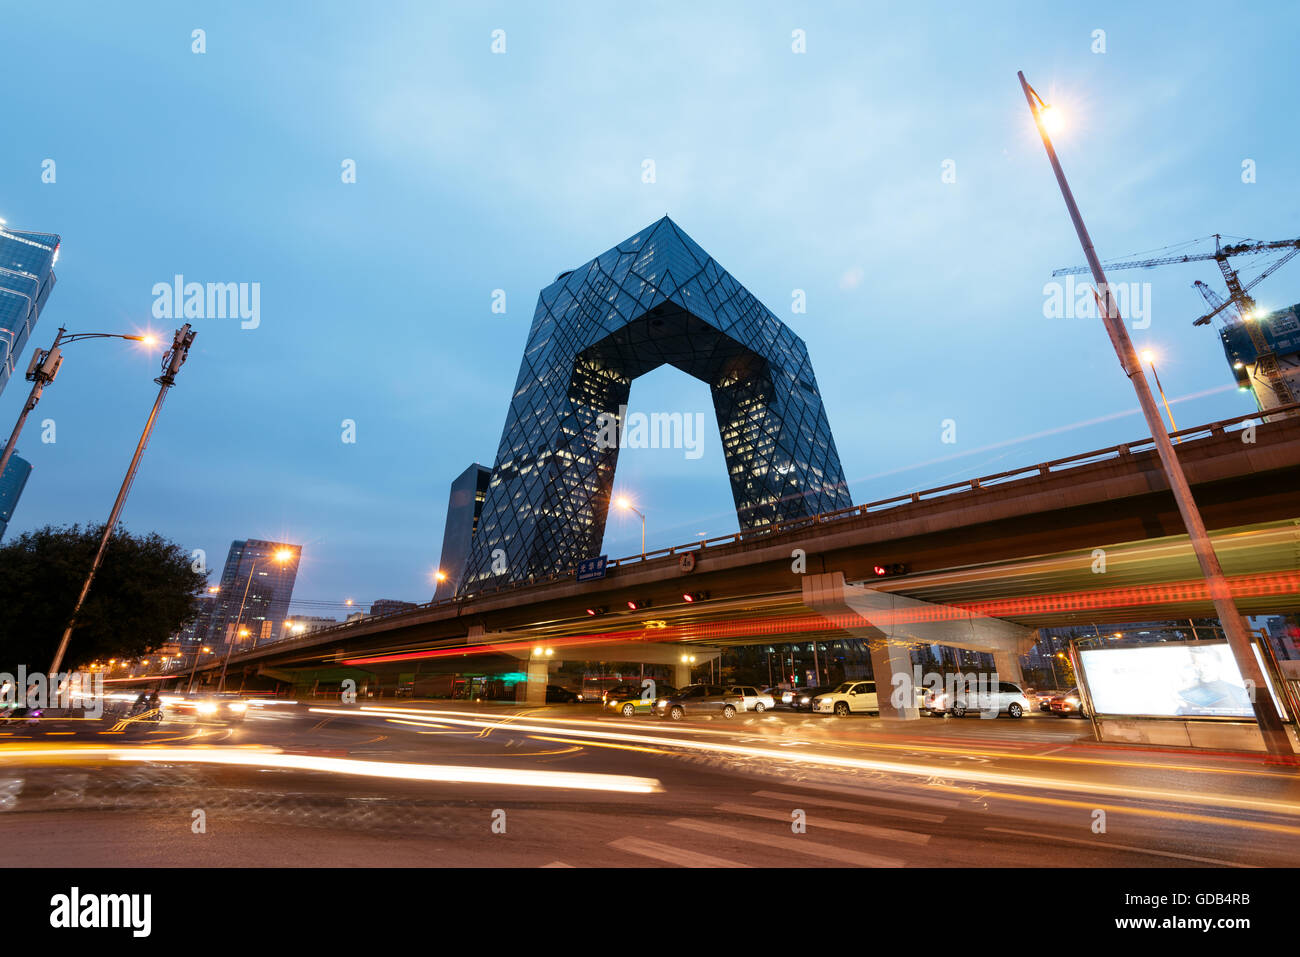 Stock Photo - Beijing, China - October 25, 2015: Night view of CCTV Headquarters Beijing China at the Central Business District Stock Photo